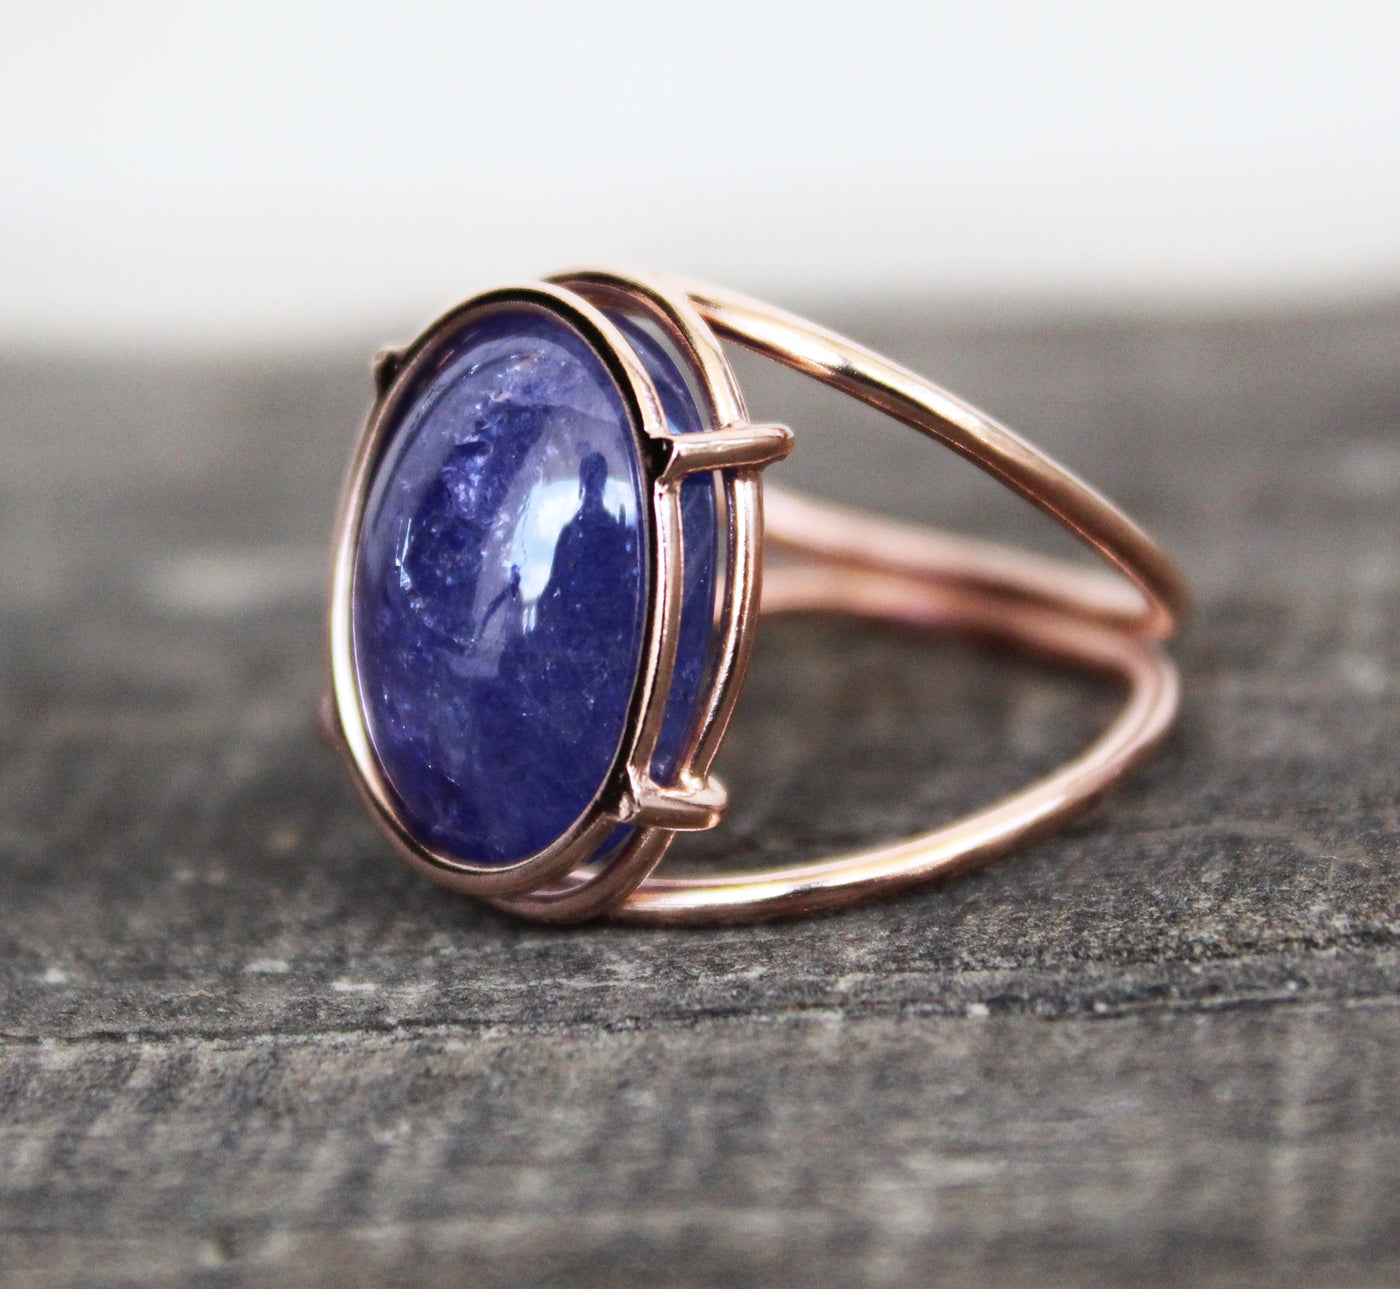 Tanzanite Ring, Rose Gold Filled Ring, Oval anzanite Ring, Silver Tanzanite Ring, Tanzanite Jewelry, Gold Stackable Ring, Awesome Gift idea